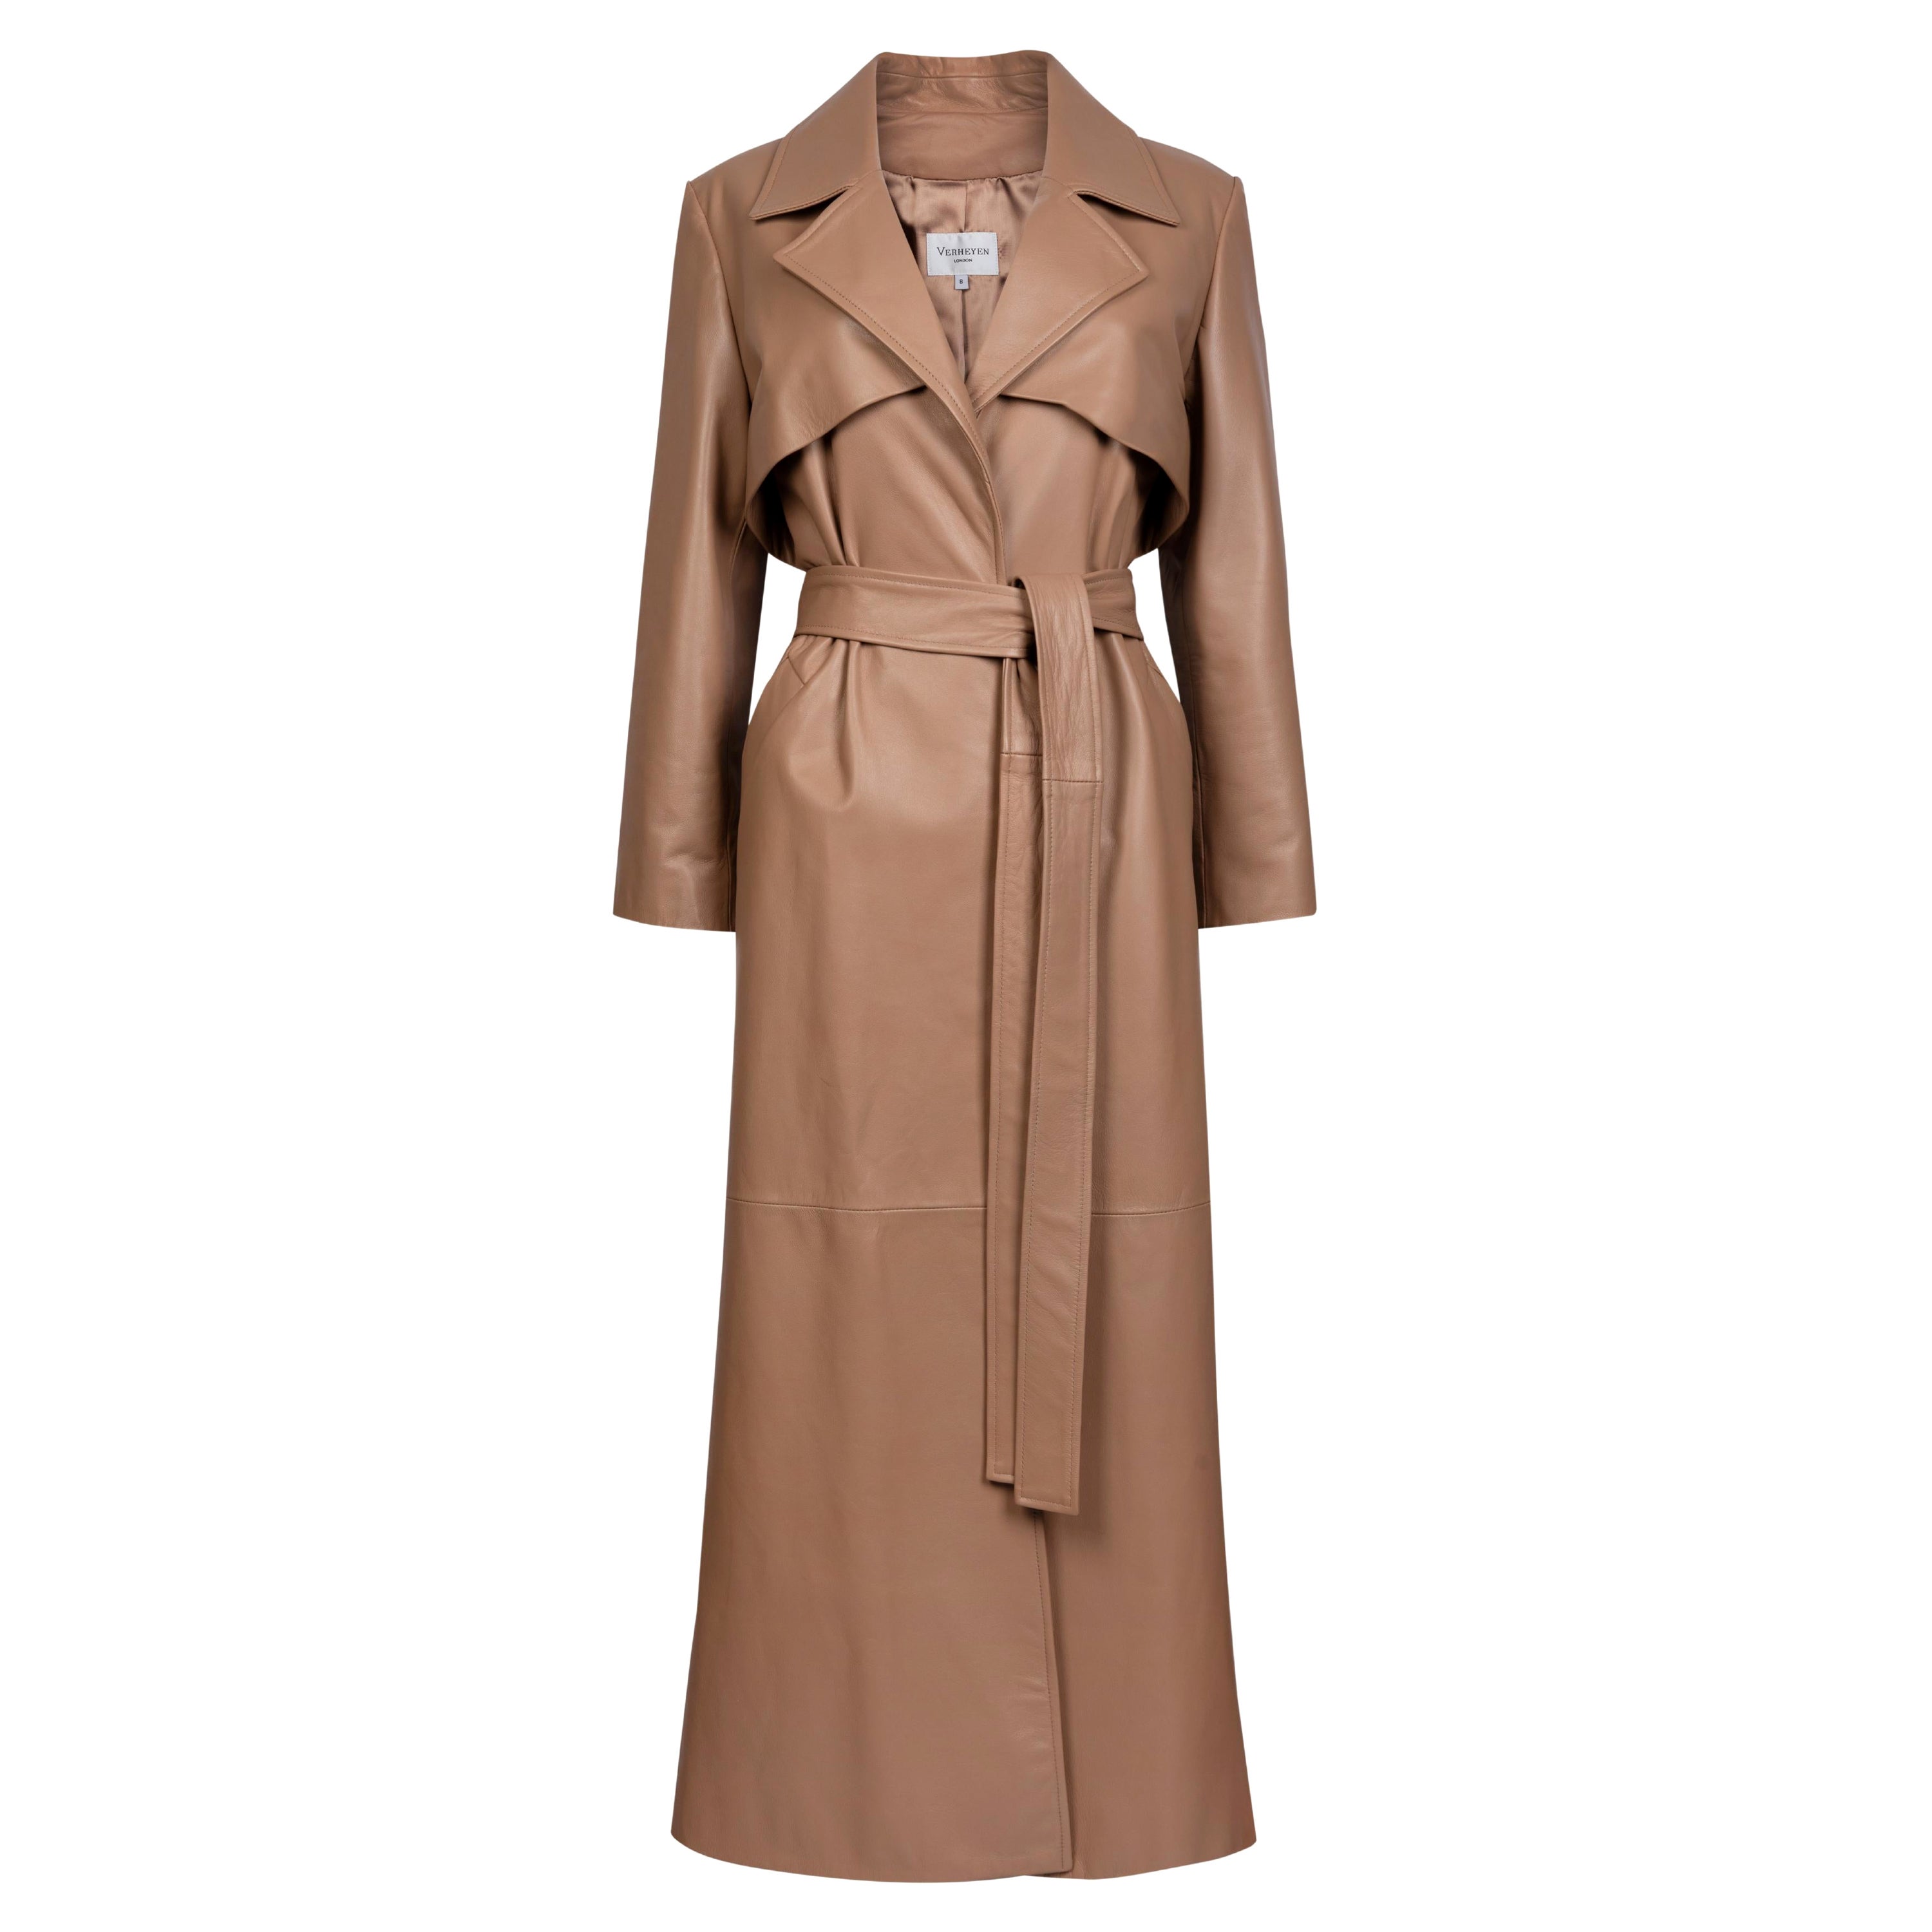 Verheyen London Leather Trench Coat in Taupe Brown - Size uk 6 For Sale